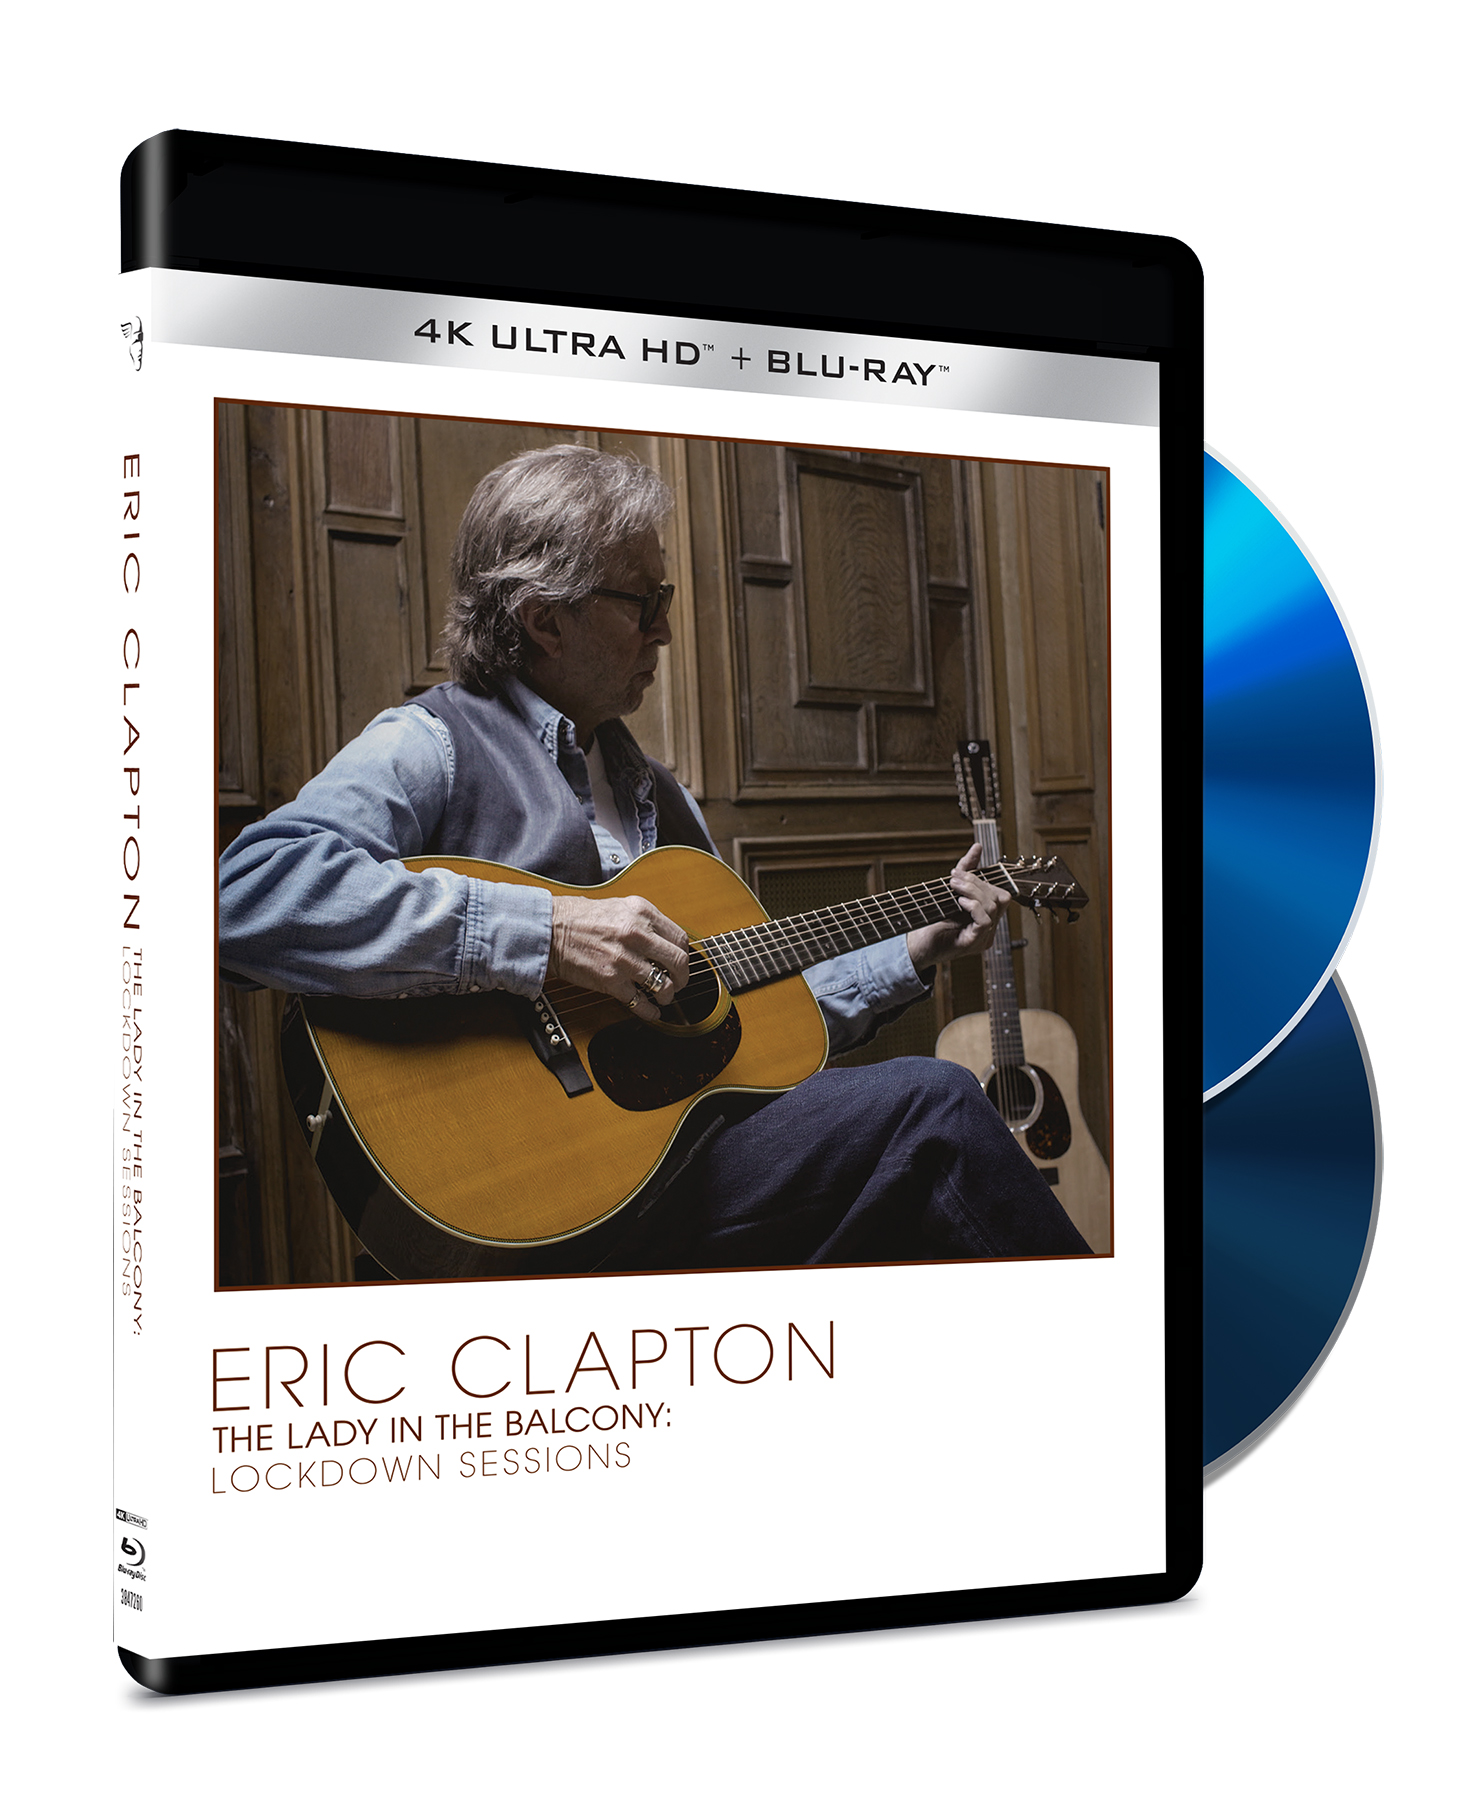 Eric Clapton The Lady in the Balcony: Lockdown Sessions Limited Edition 4K  UHD + Blu-ray